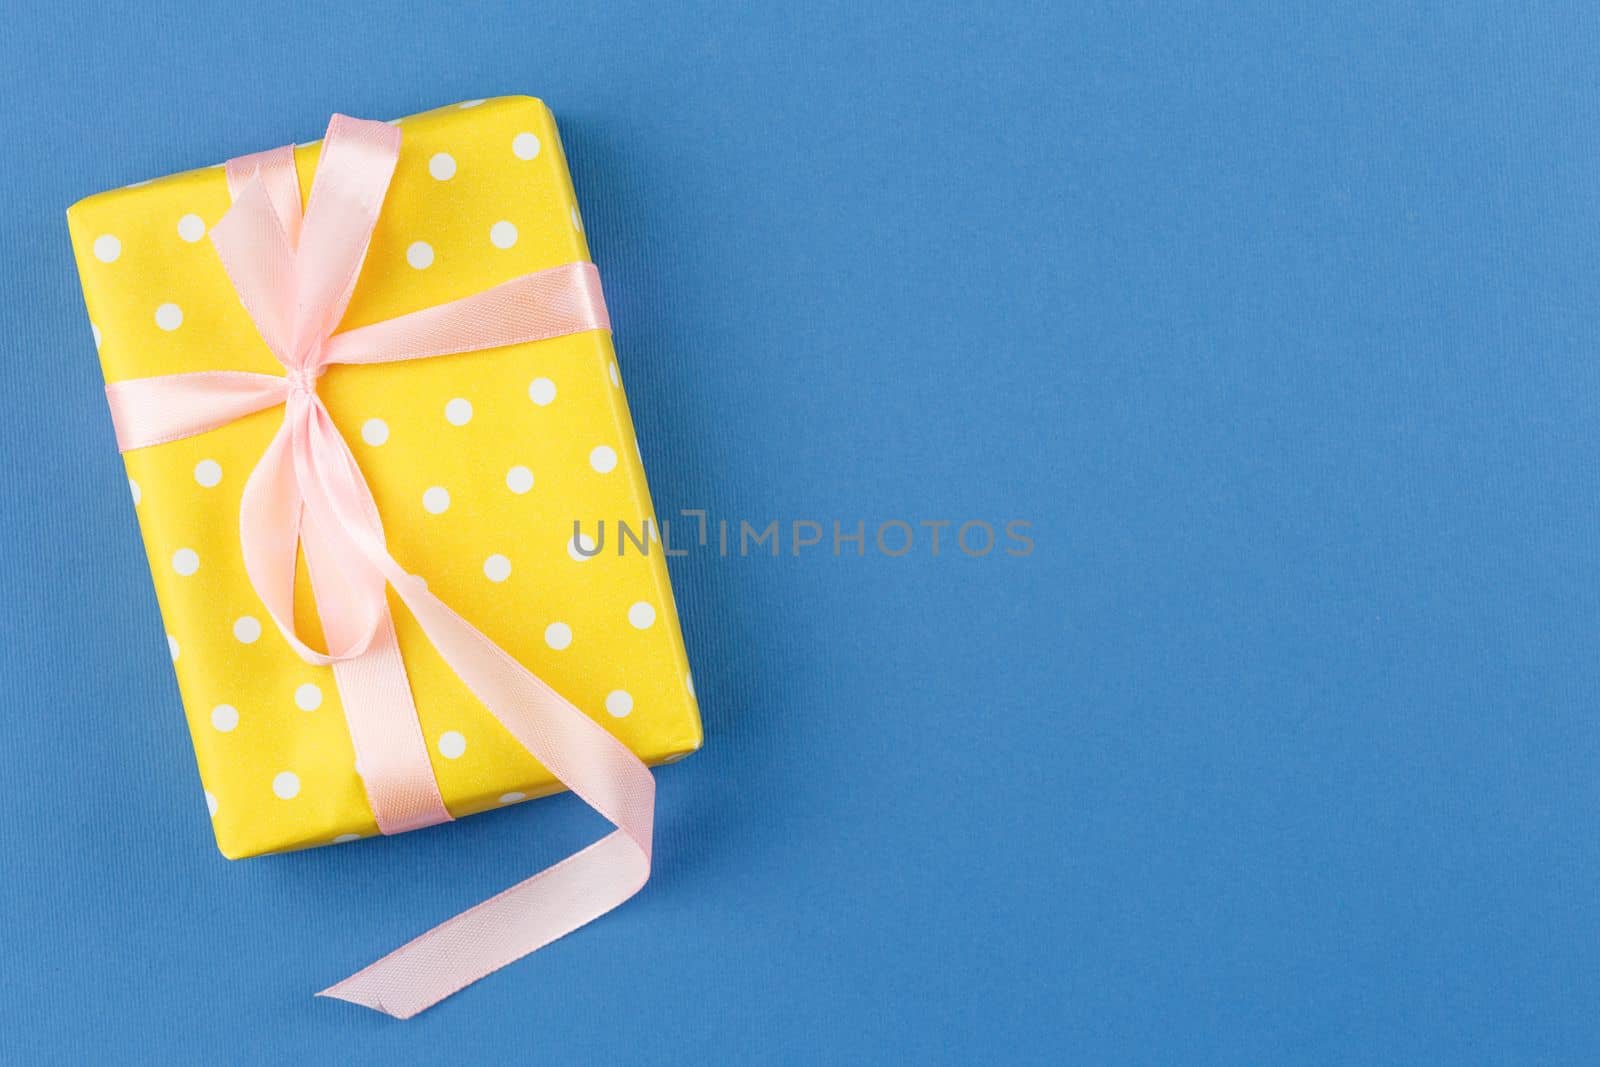 Gift in yellow wrapping paper with polka dots on blue isolated background. Flat lay. Present box with satin pink bow. Top view.